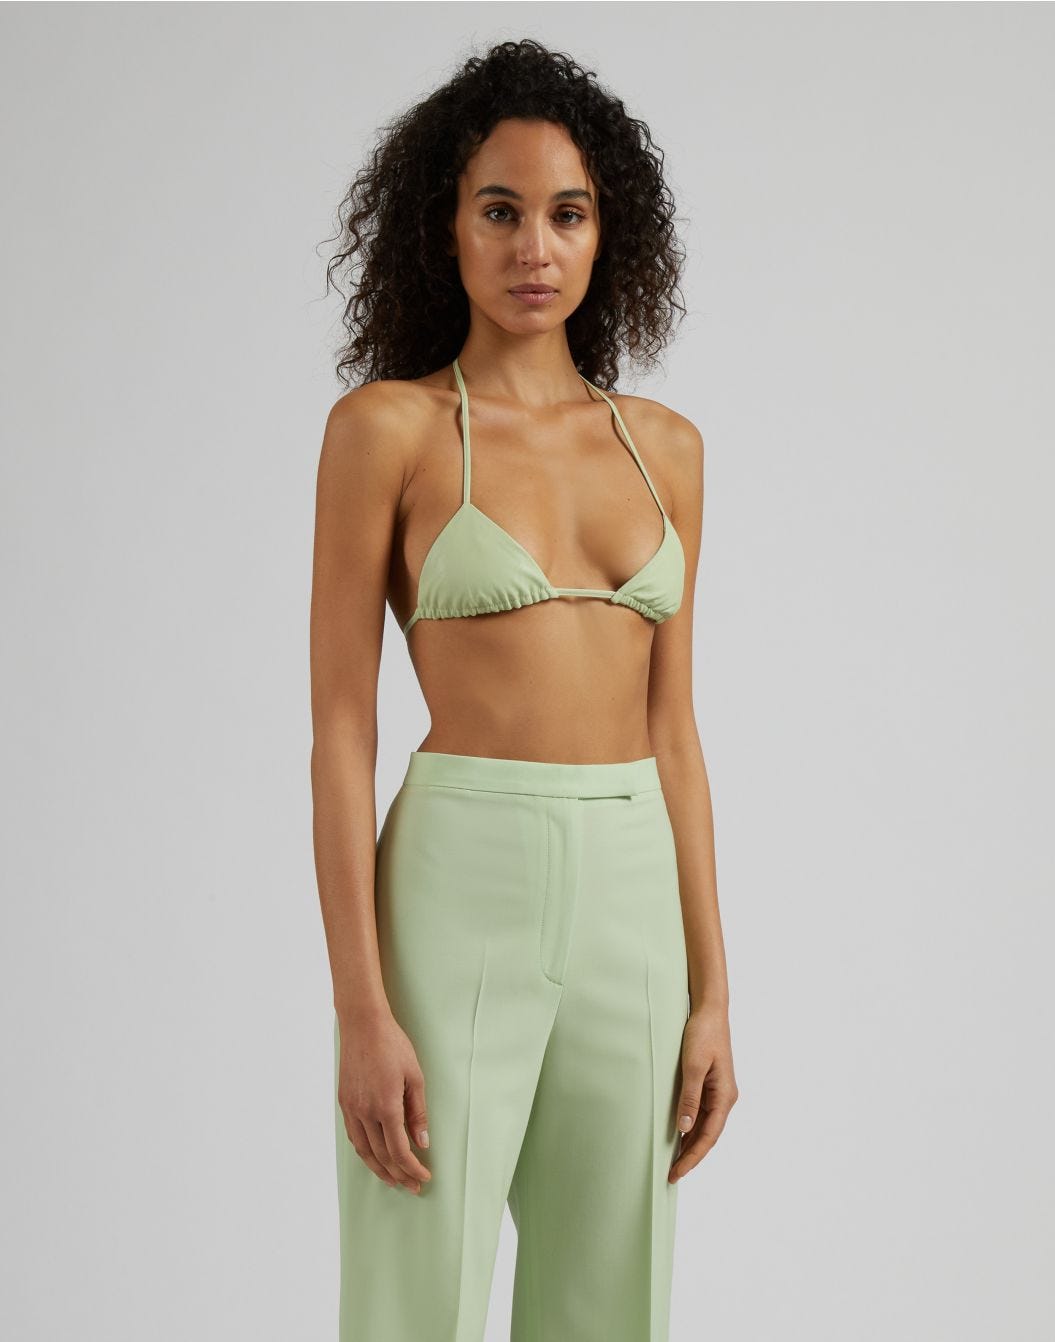 Pastel green faux leather bralette with ties